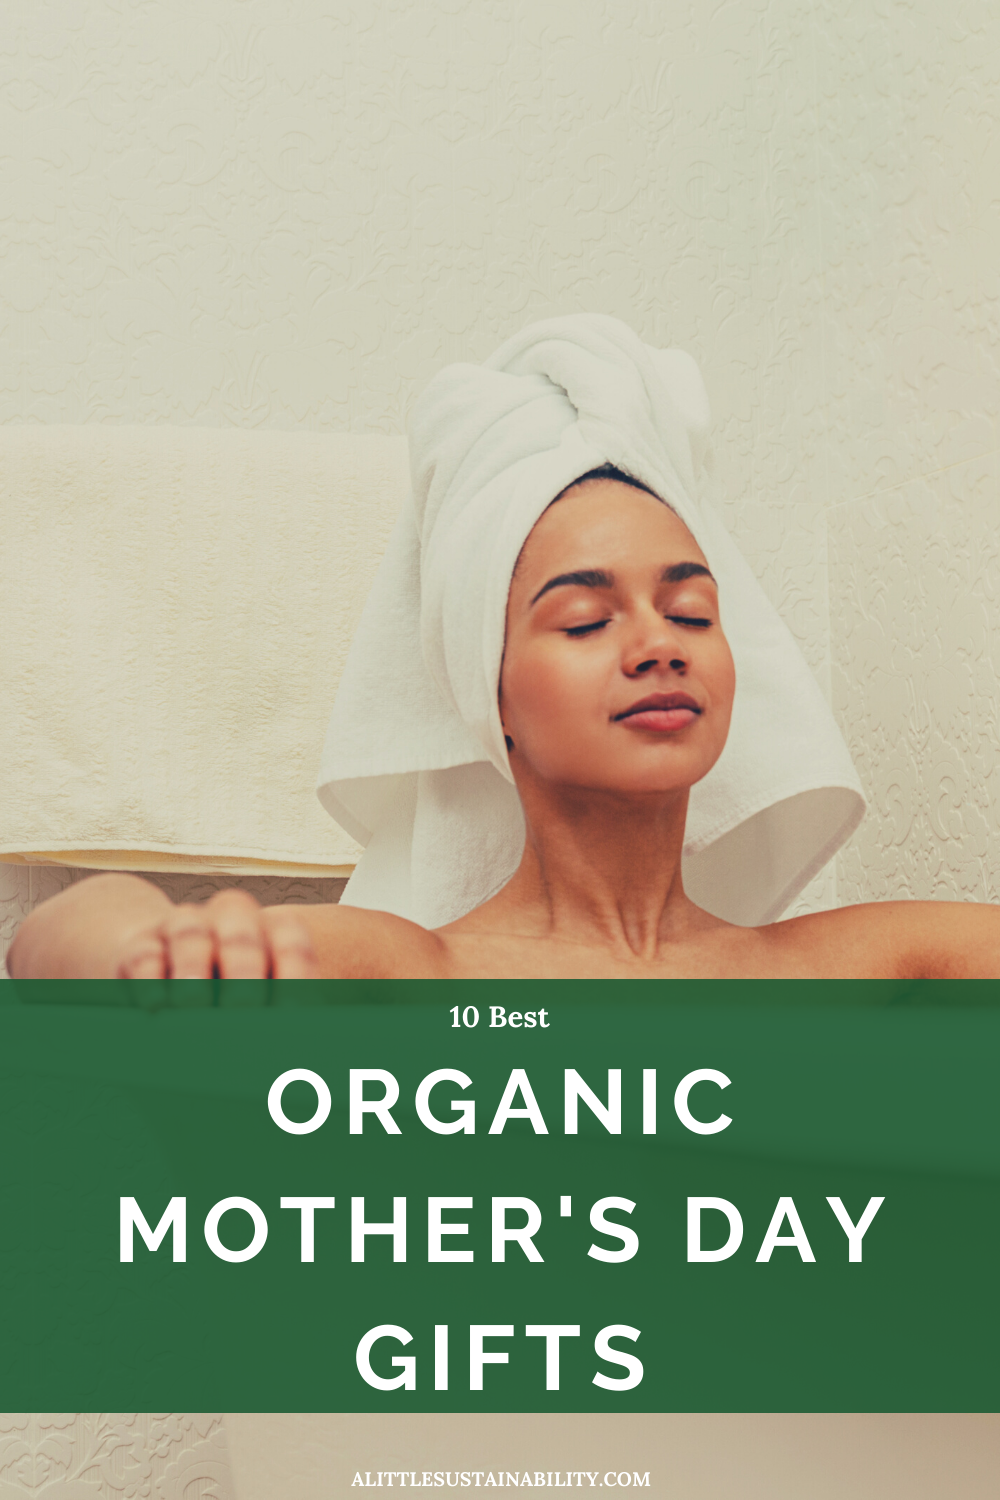 10 best organic Mother's Day Gifts. Gifts for mom that are organic and come from ethical brands. #naturalbeauty #organicskincare #mothersdaygiftsfromdaughter